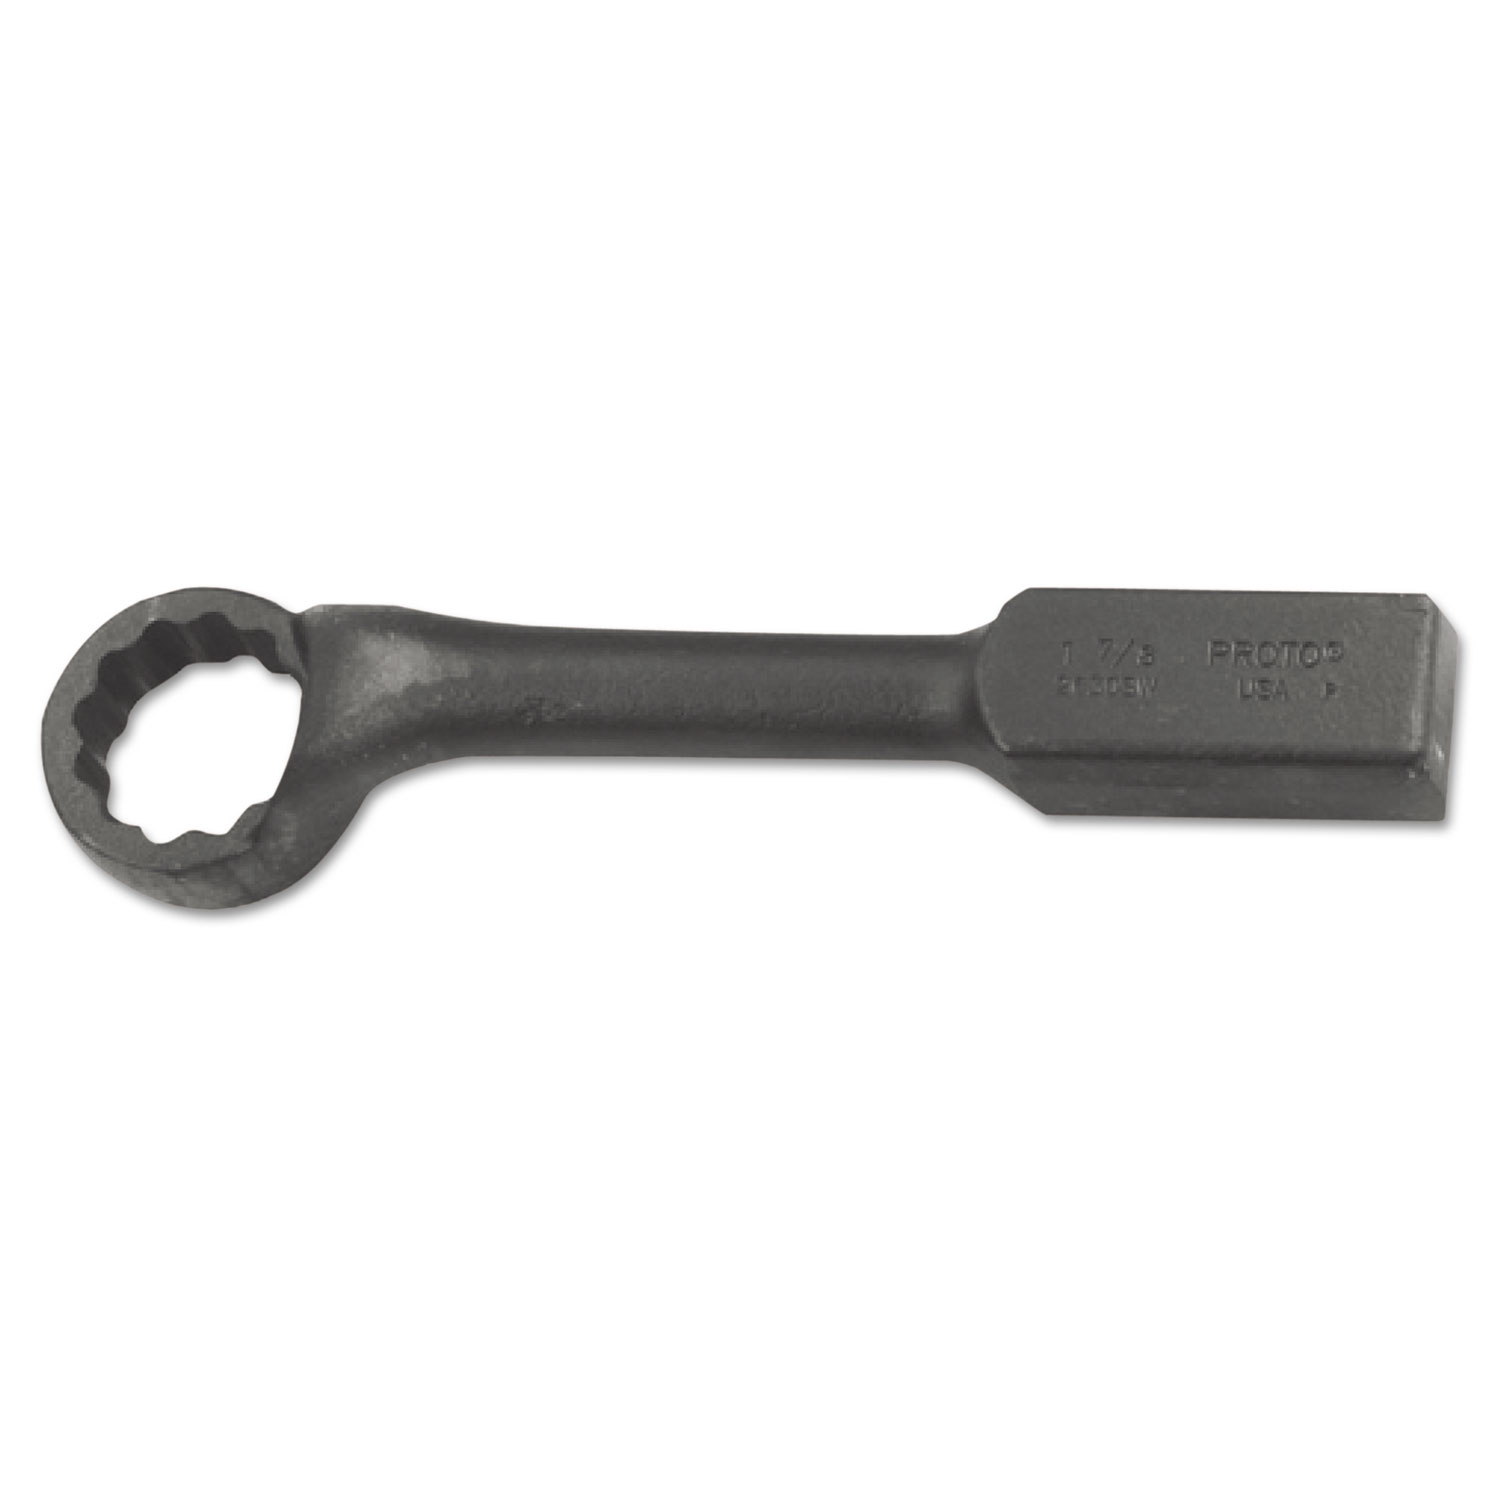 PROTO Heavy-Duty Offset Striking Wrench, 10 3/4 Long, 1-1/4 Opening, 12-Point